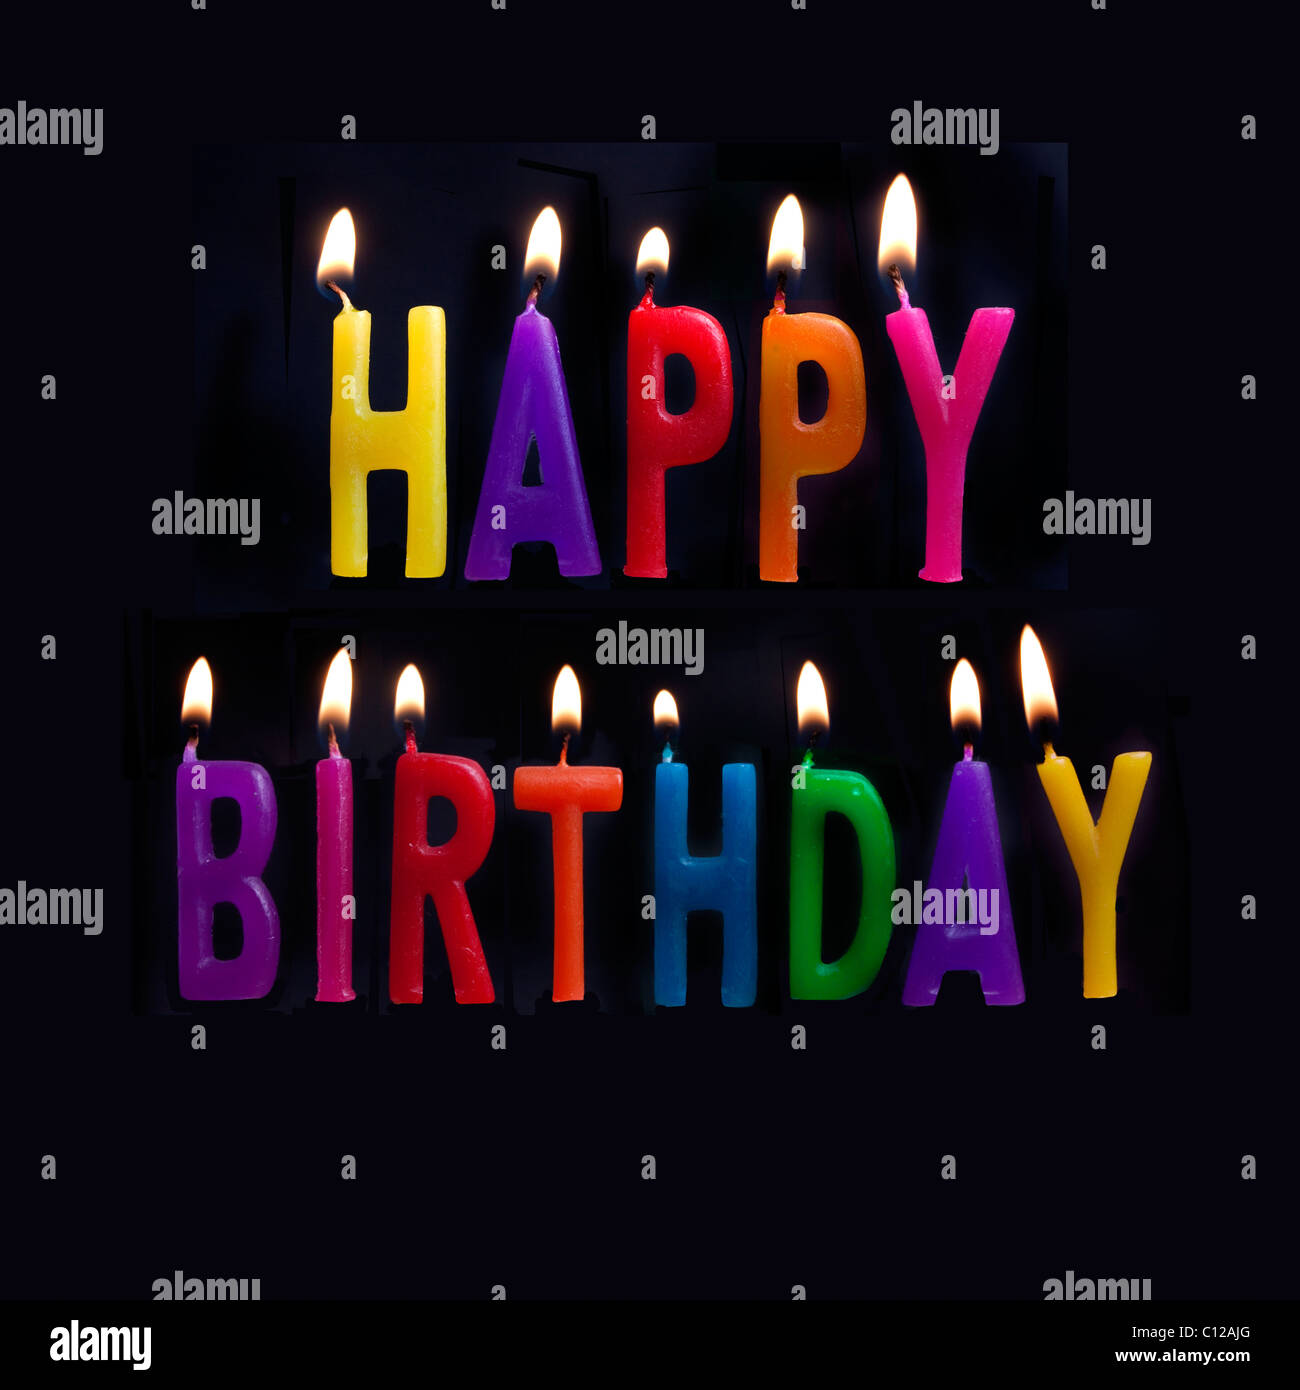 HAPPY BIRTHDAY MESSAGE IN ENGLISH WITH CANDLES ALIGHT Stock Photo